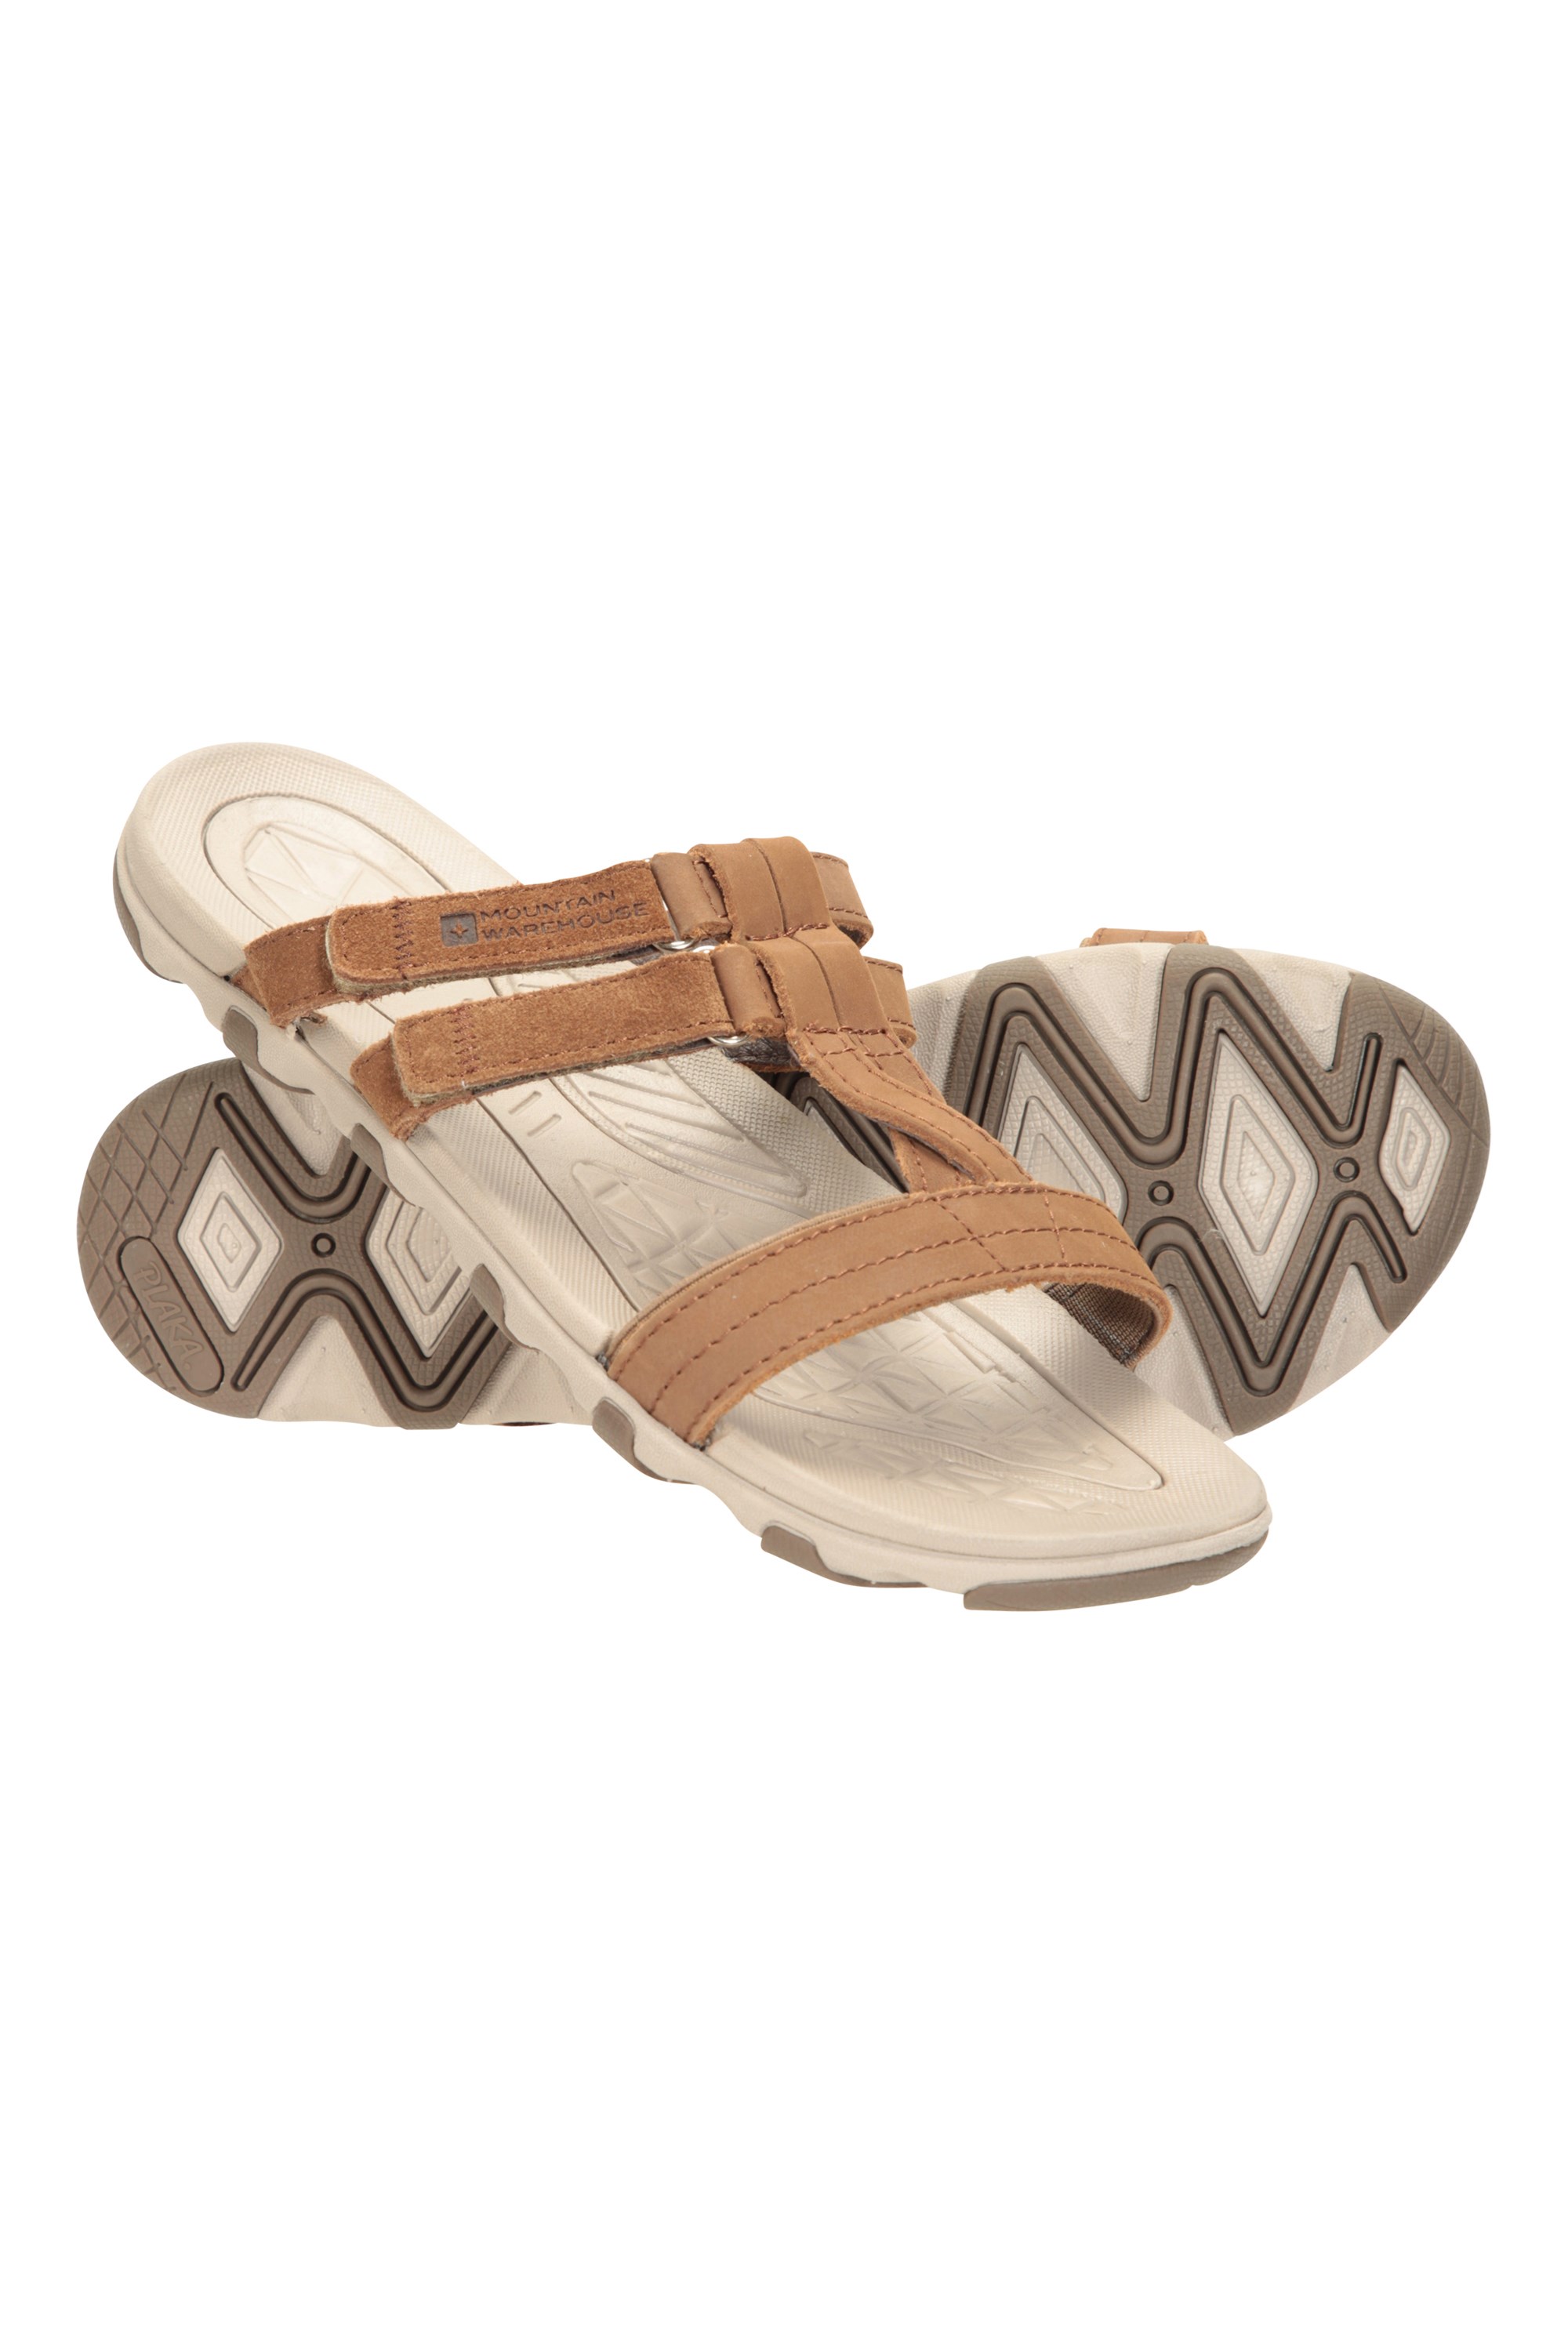 Cruise Womens Leather Sandal - Brown